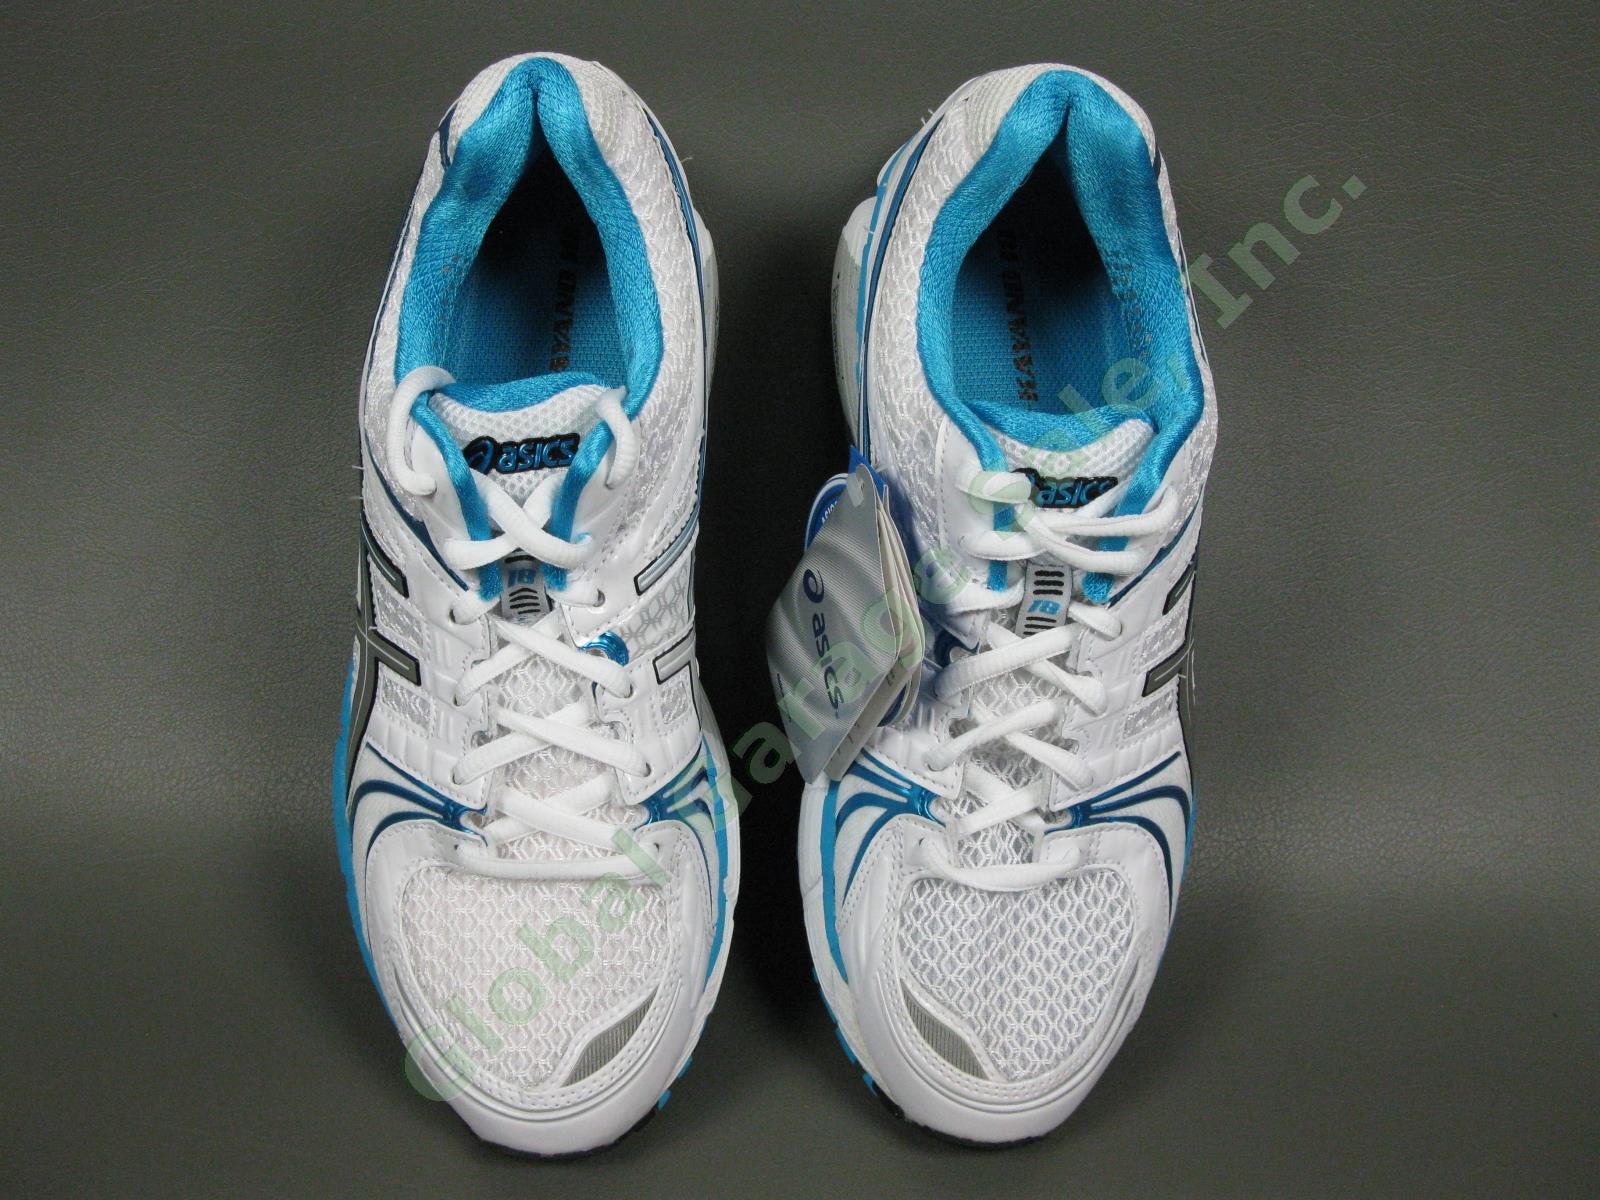 NEW Asics Gel Kayano-18 Womens White/Blue Running Sneakers Pair Size US-8 Shoes 2